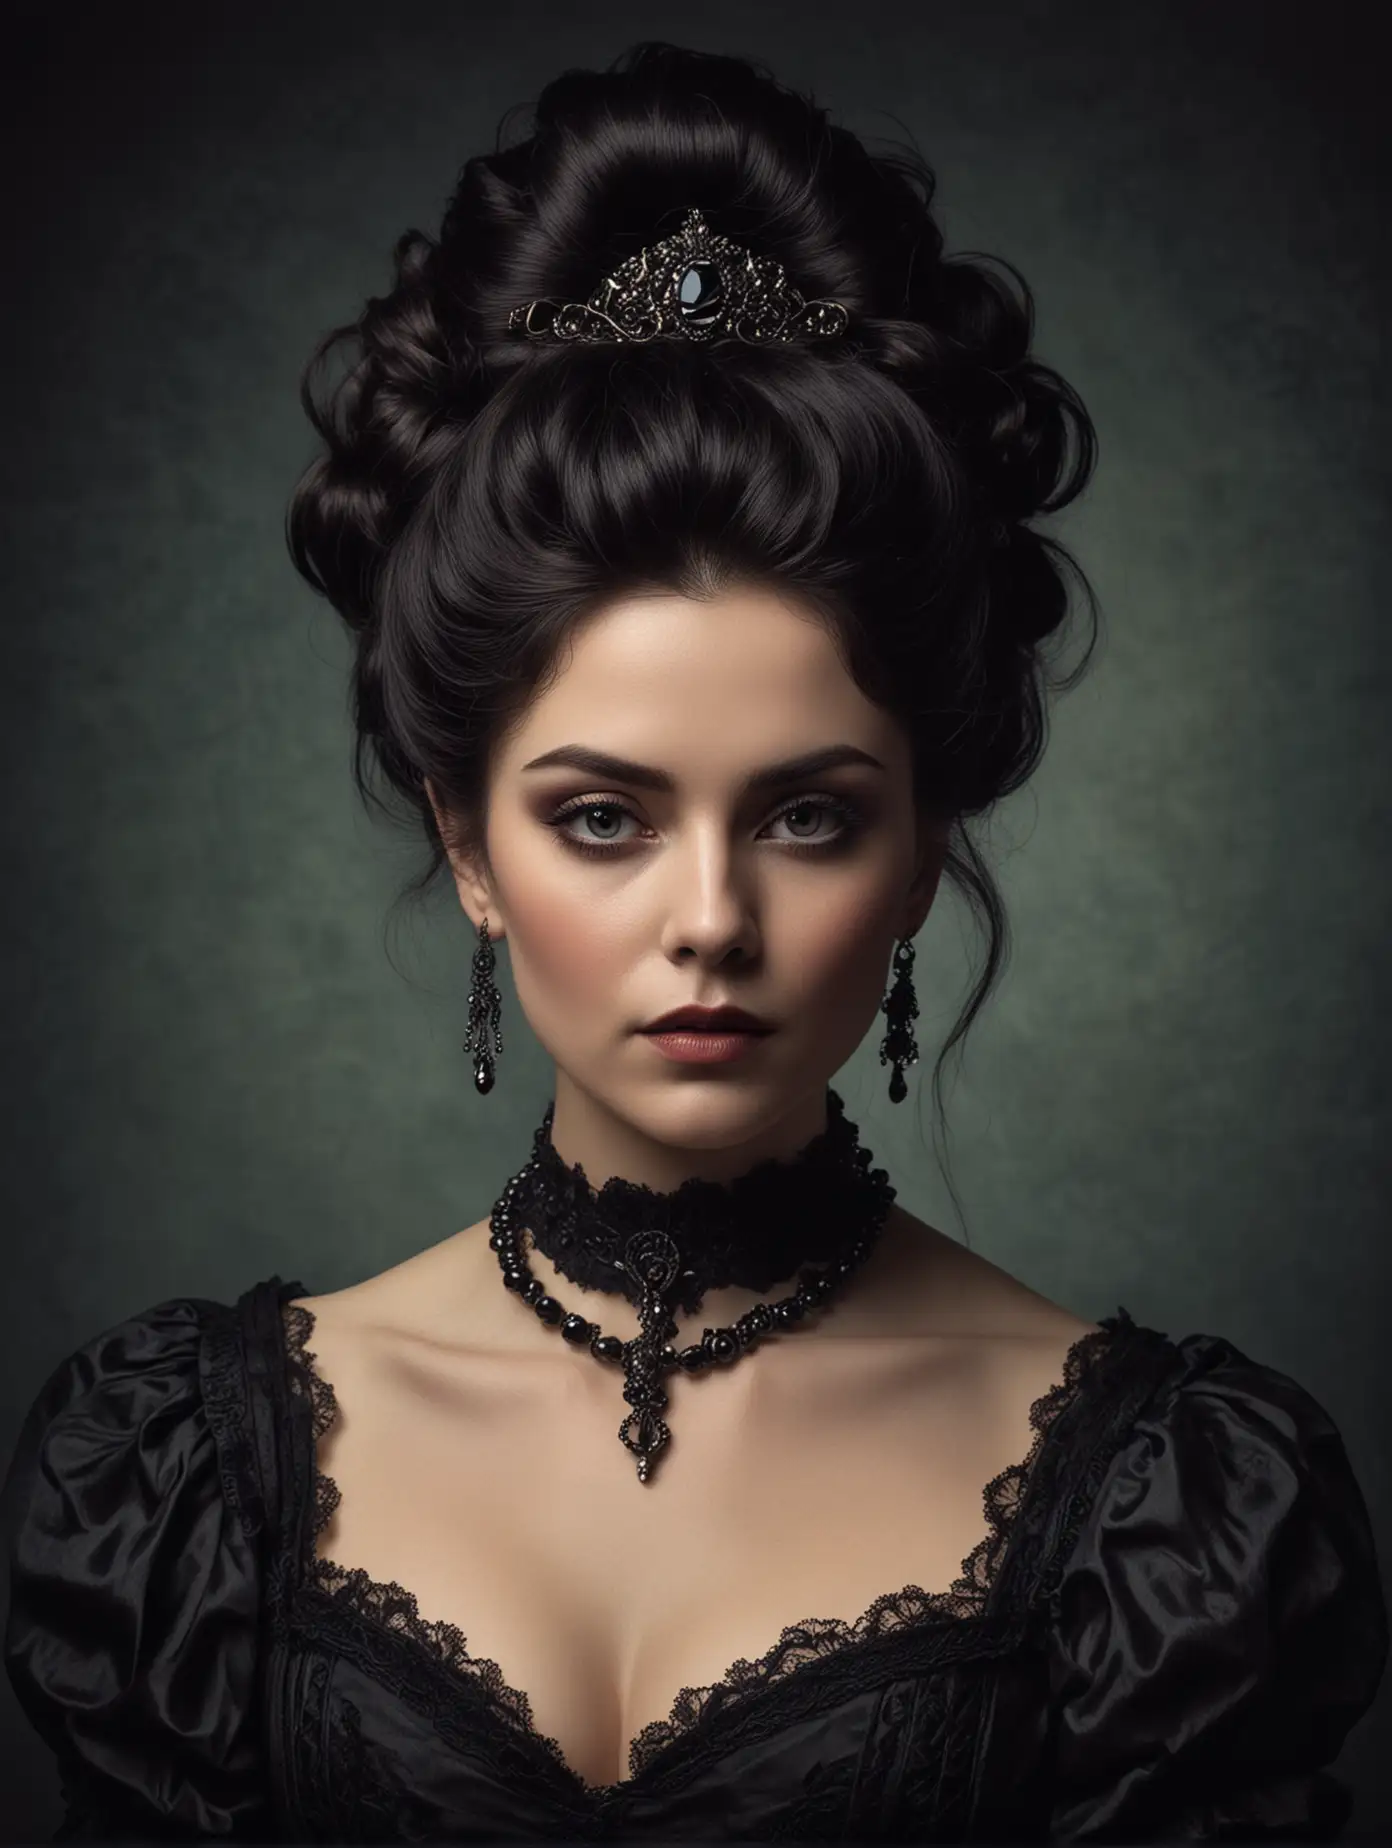 Gothic Victorian Woman Portrait with Dark Hair and Jewelry